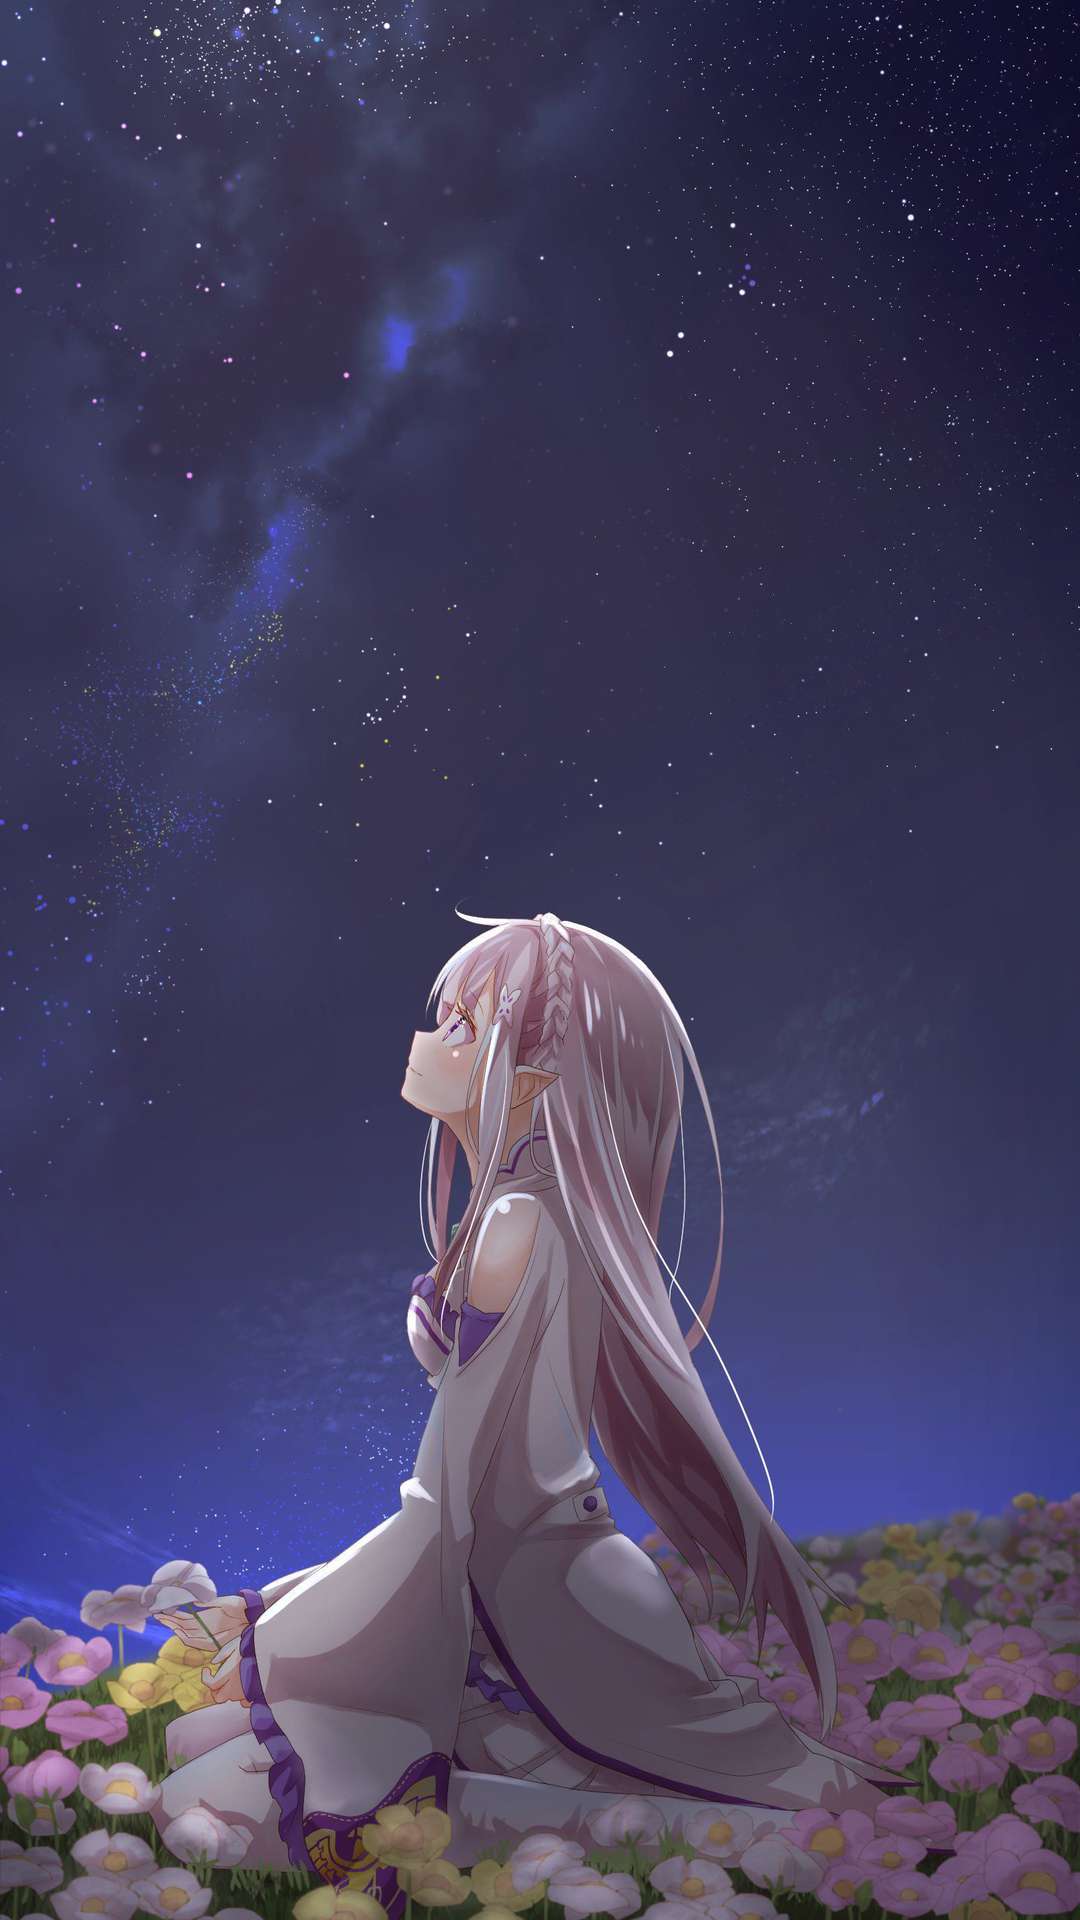 21545 Sad anime  Android iPhone Desktop HD Backgrounds  Wallpapers  1080p 4k HD Wallpapers Desktop Background  Android  iPhone 1080p  4k 1080x764 2023